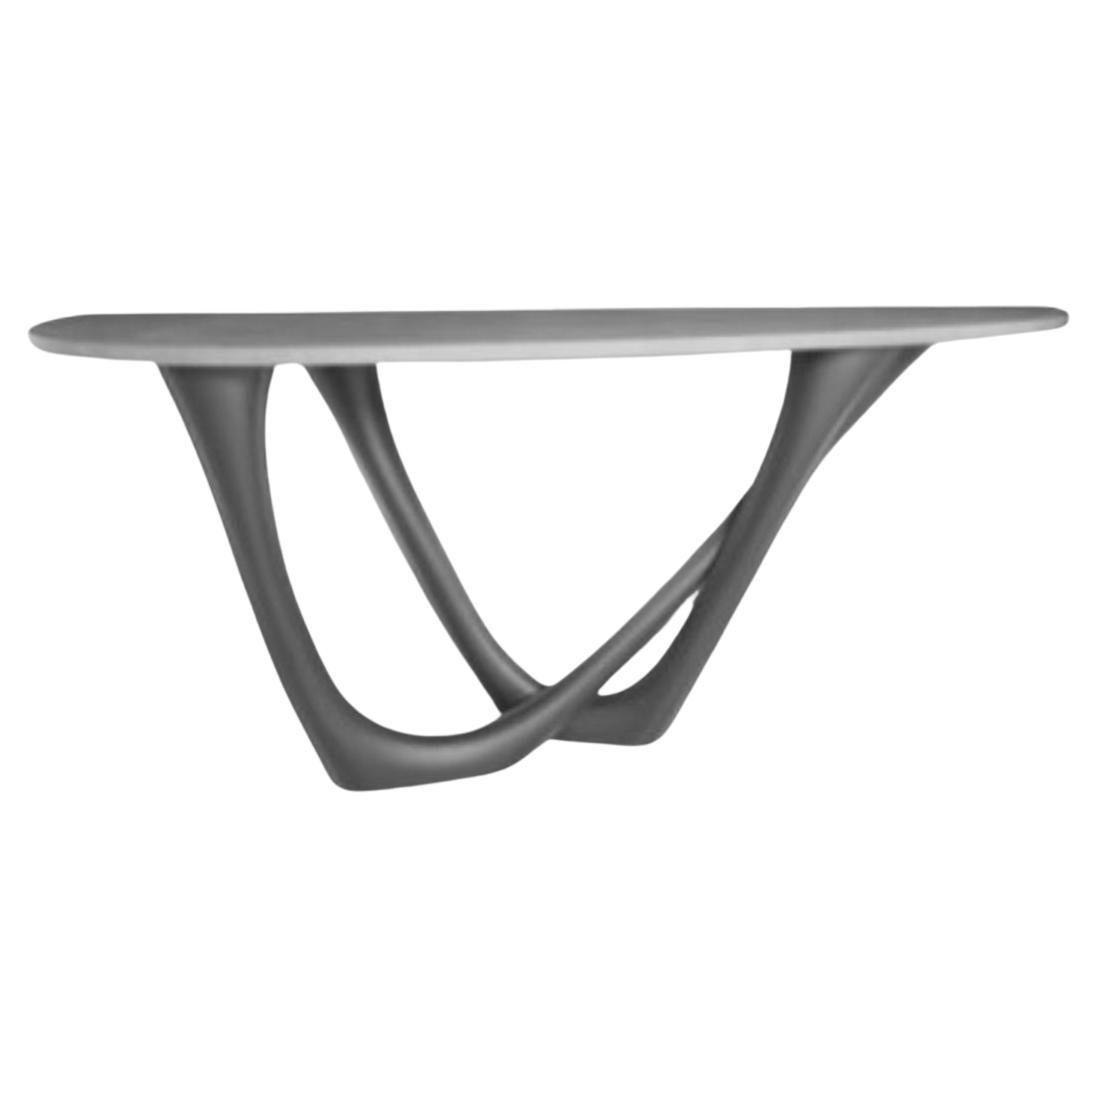 Graphite G-Console Duo Concrete Top and Steel Base by Zieta